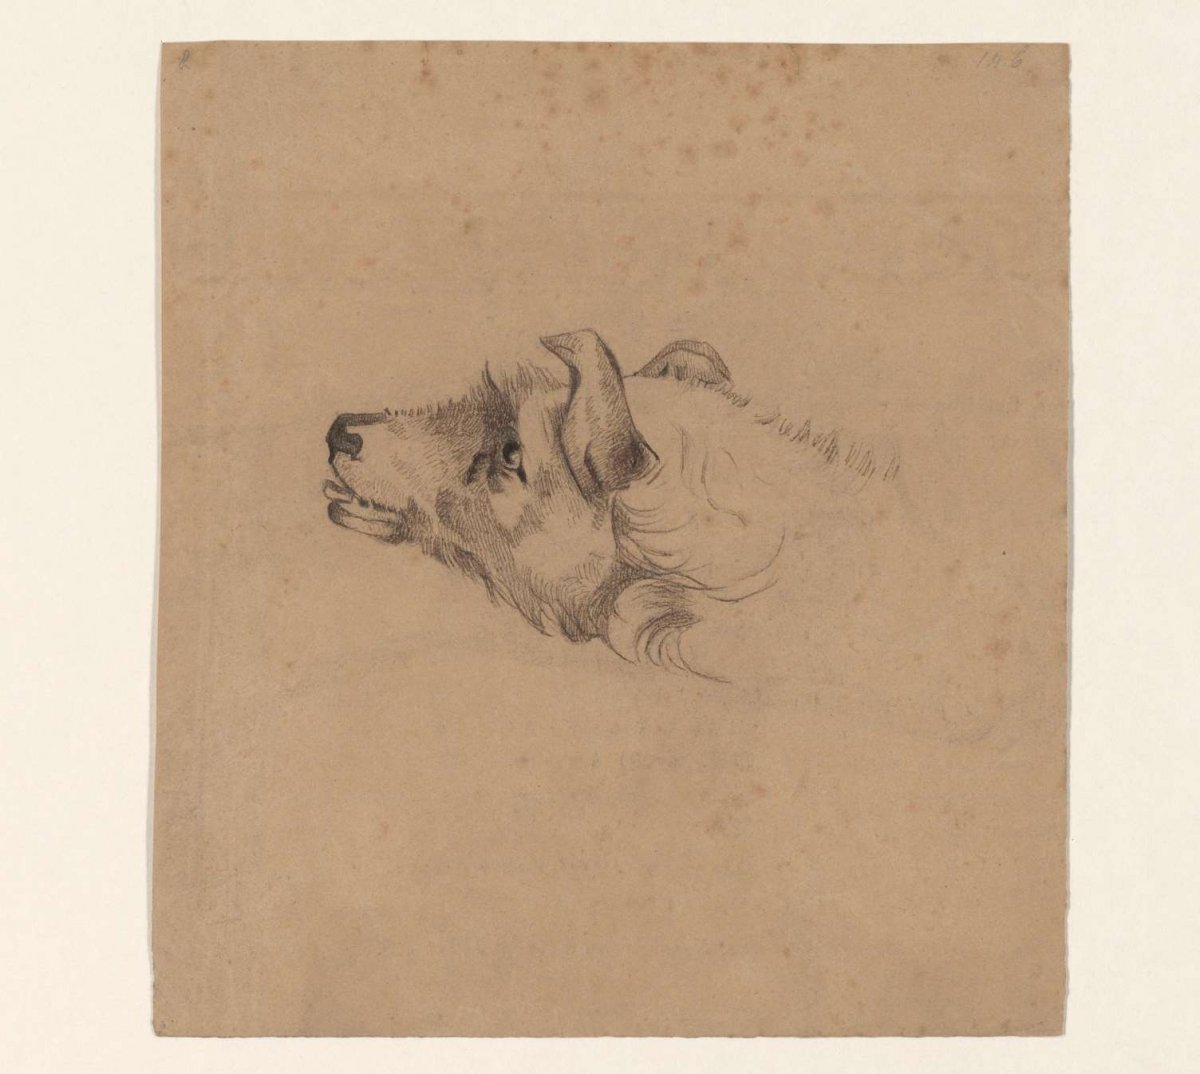 Head of a dog, to the left, Johannes Tavenraat, 1819 - 1881